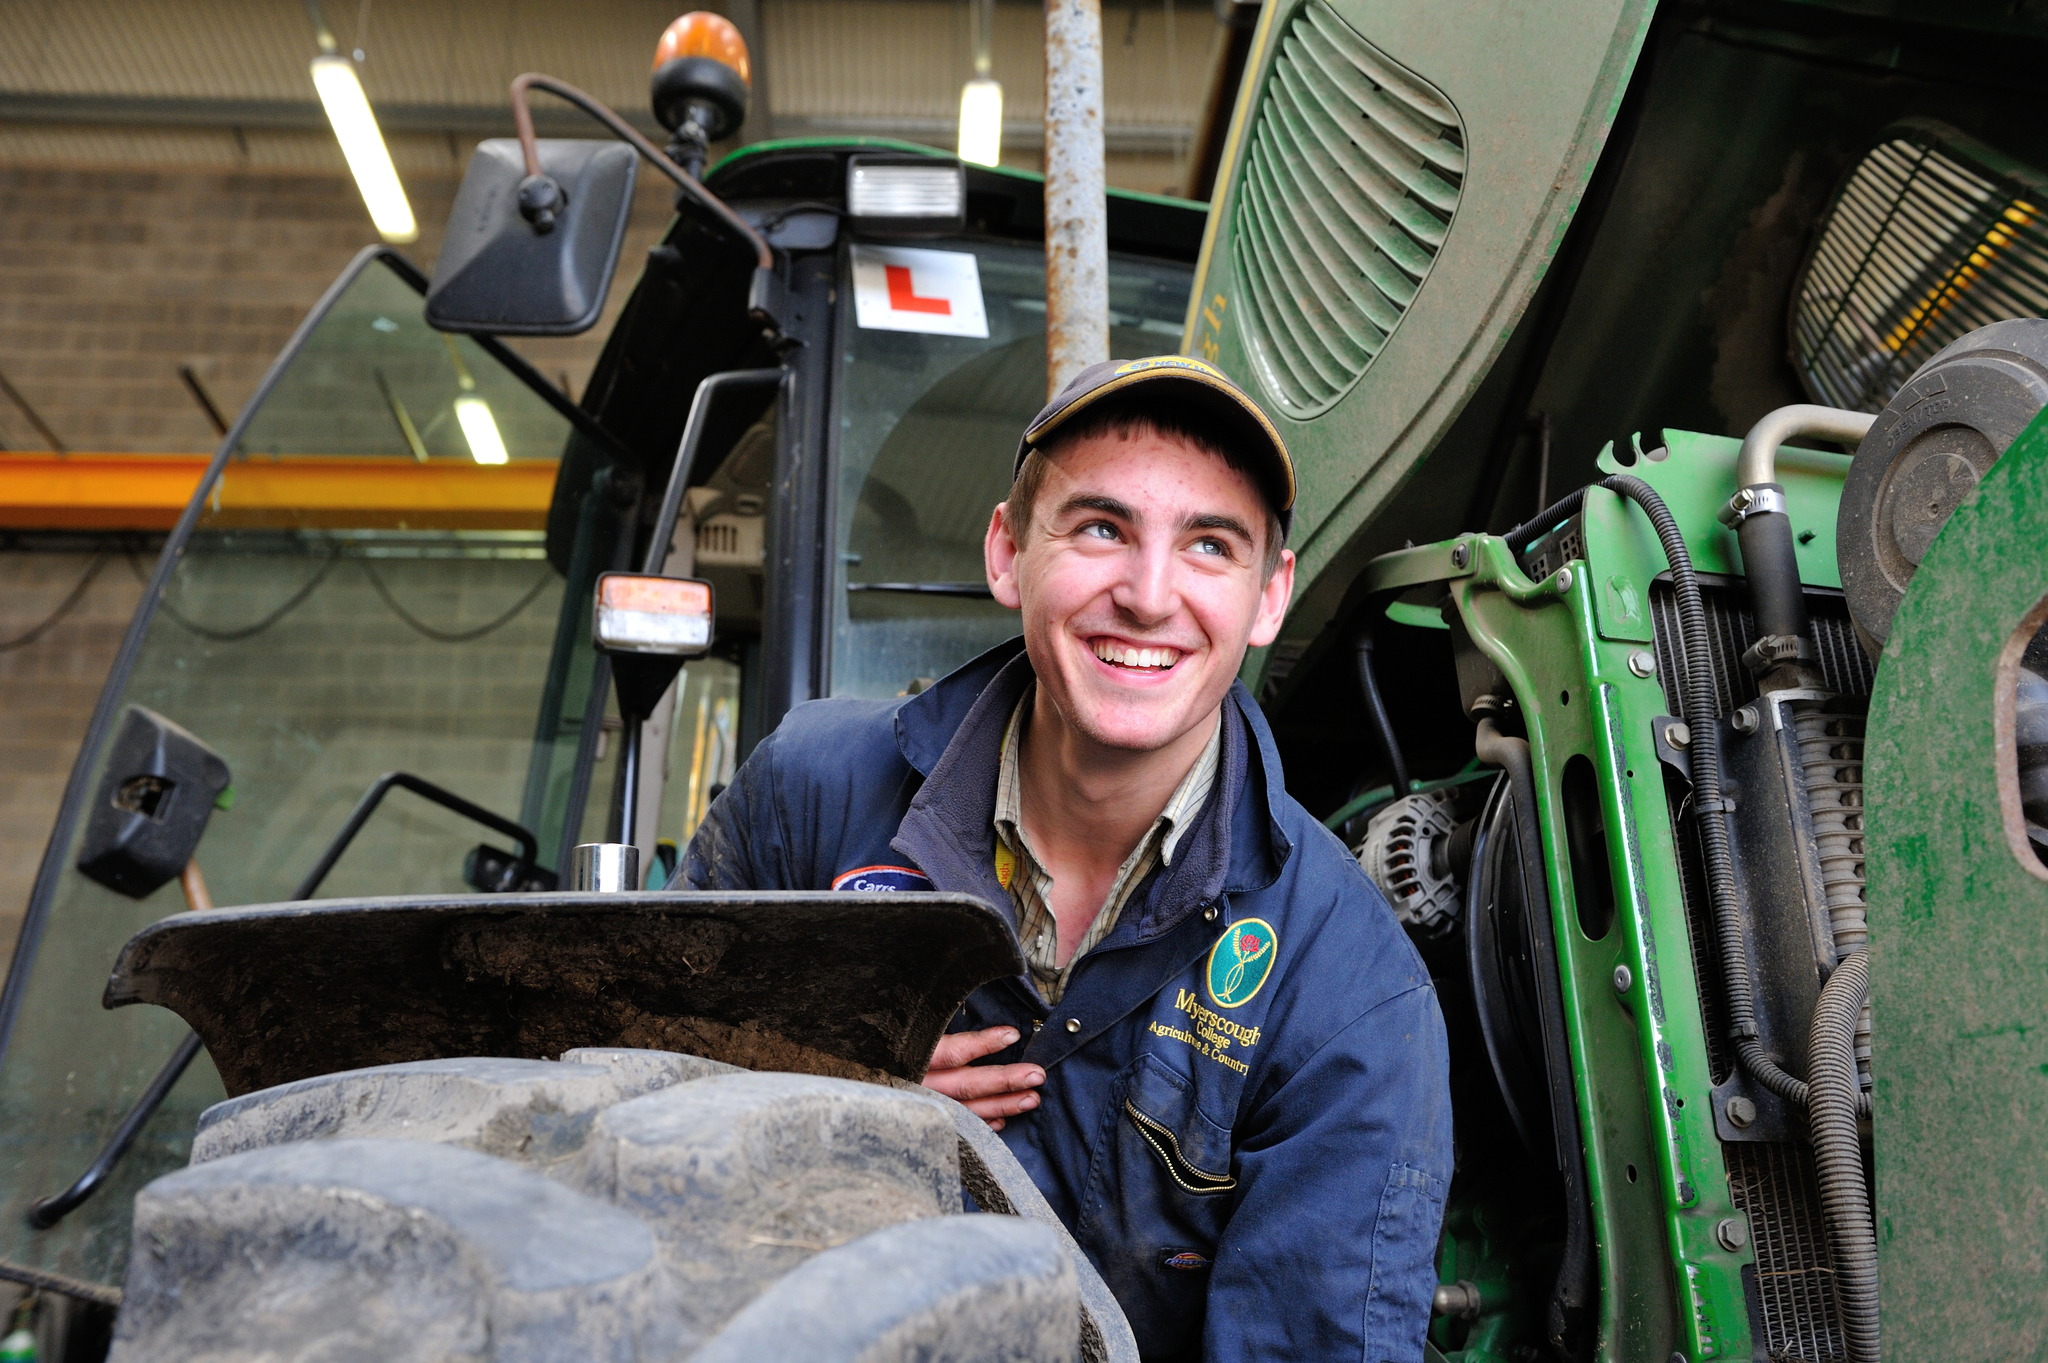 Myerscough College Agricultural Engineering - Checking Tractor Tyres